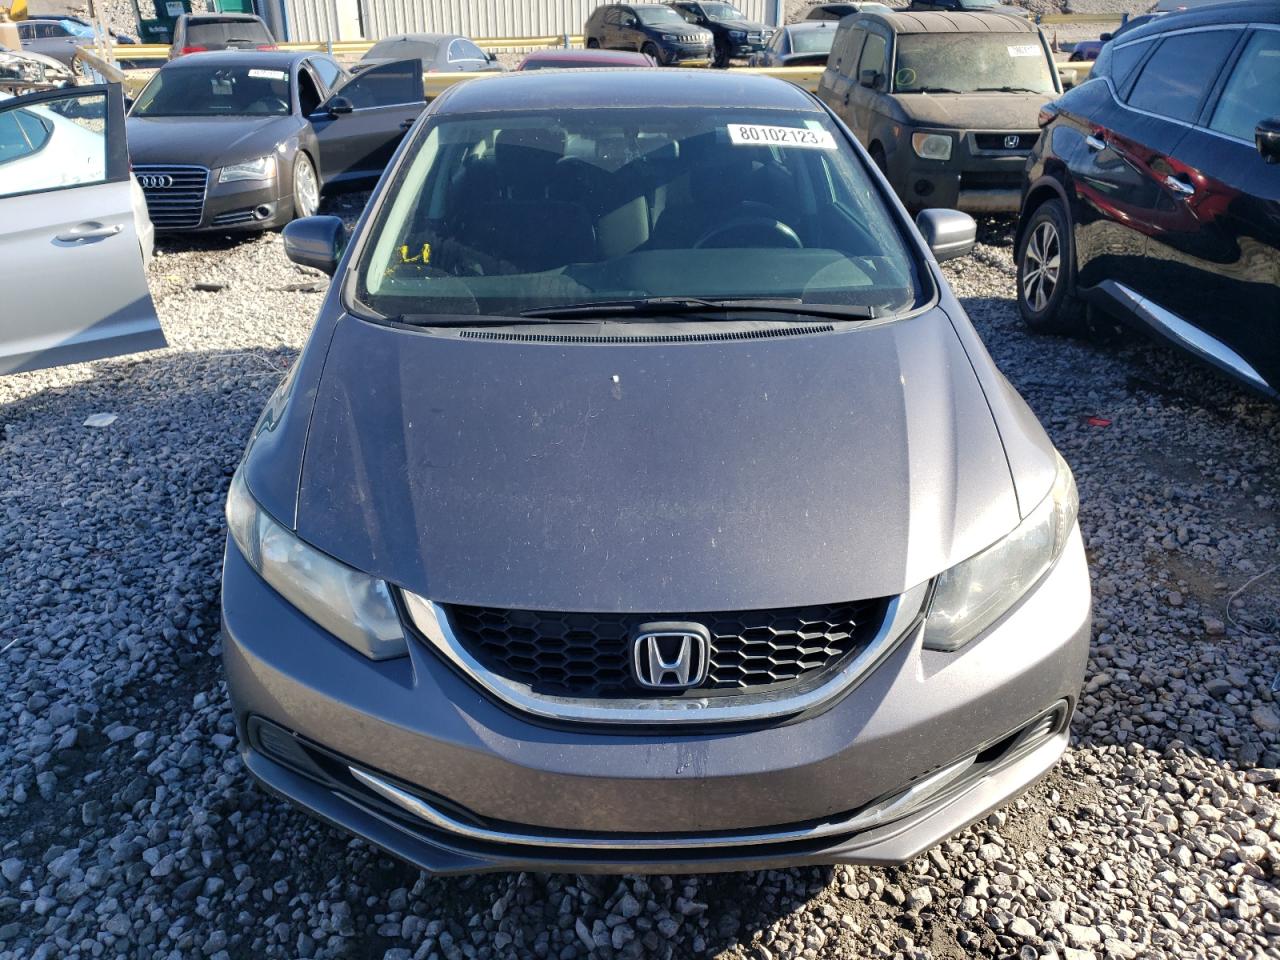 19XFB2F51FE****** Used and Repairable 2015 Honda Civic in Alabama State